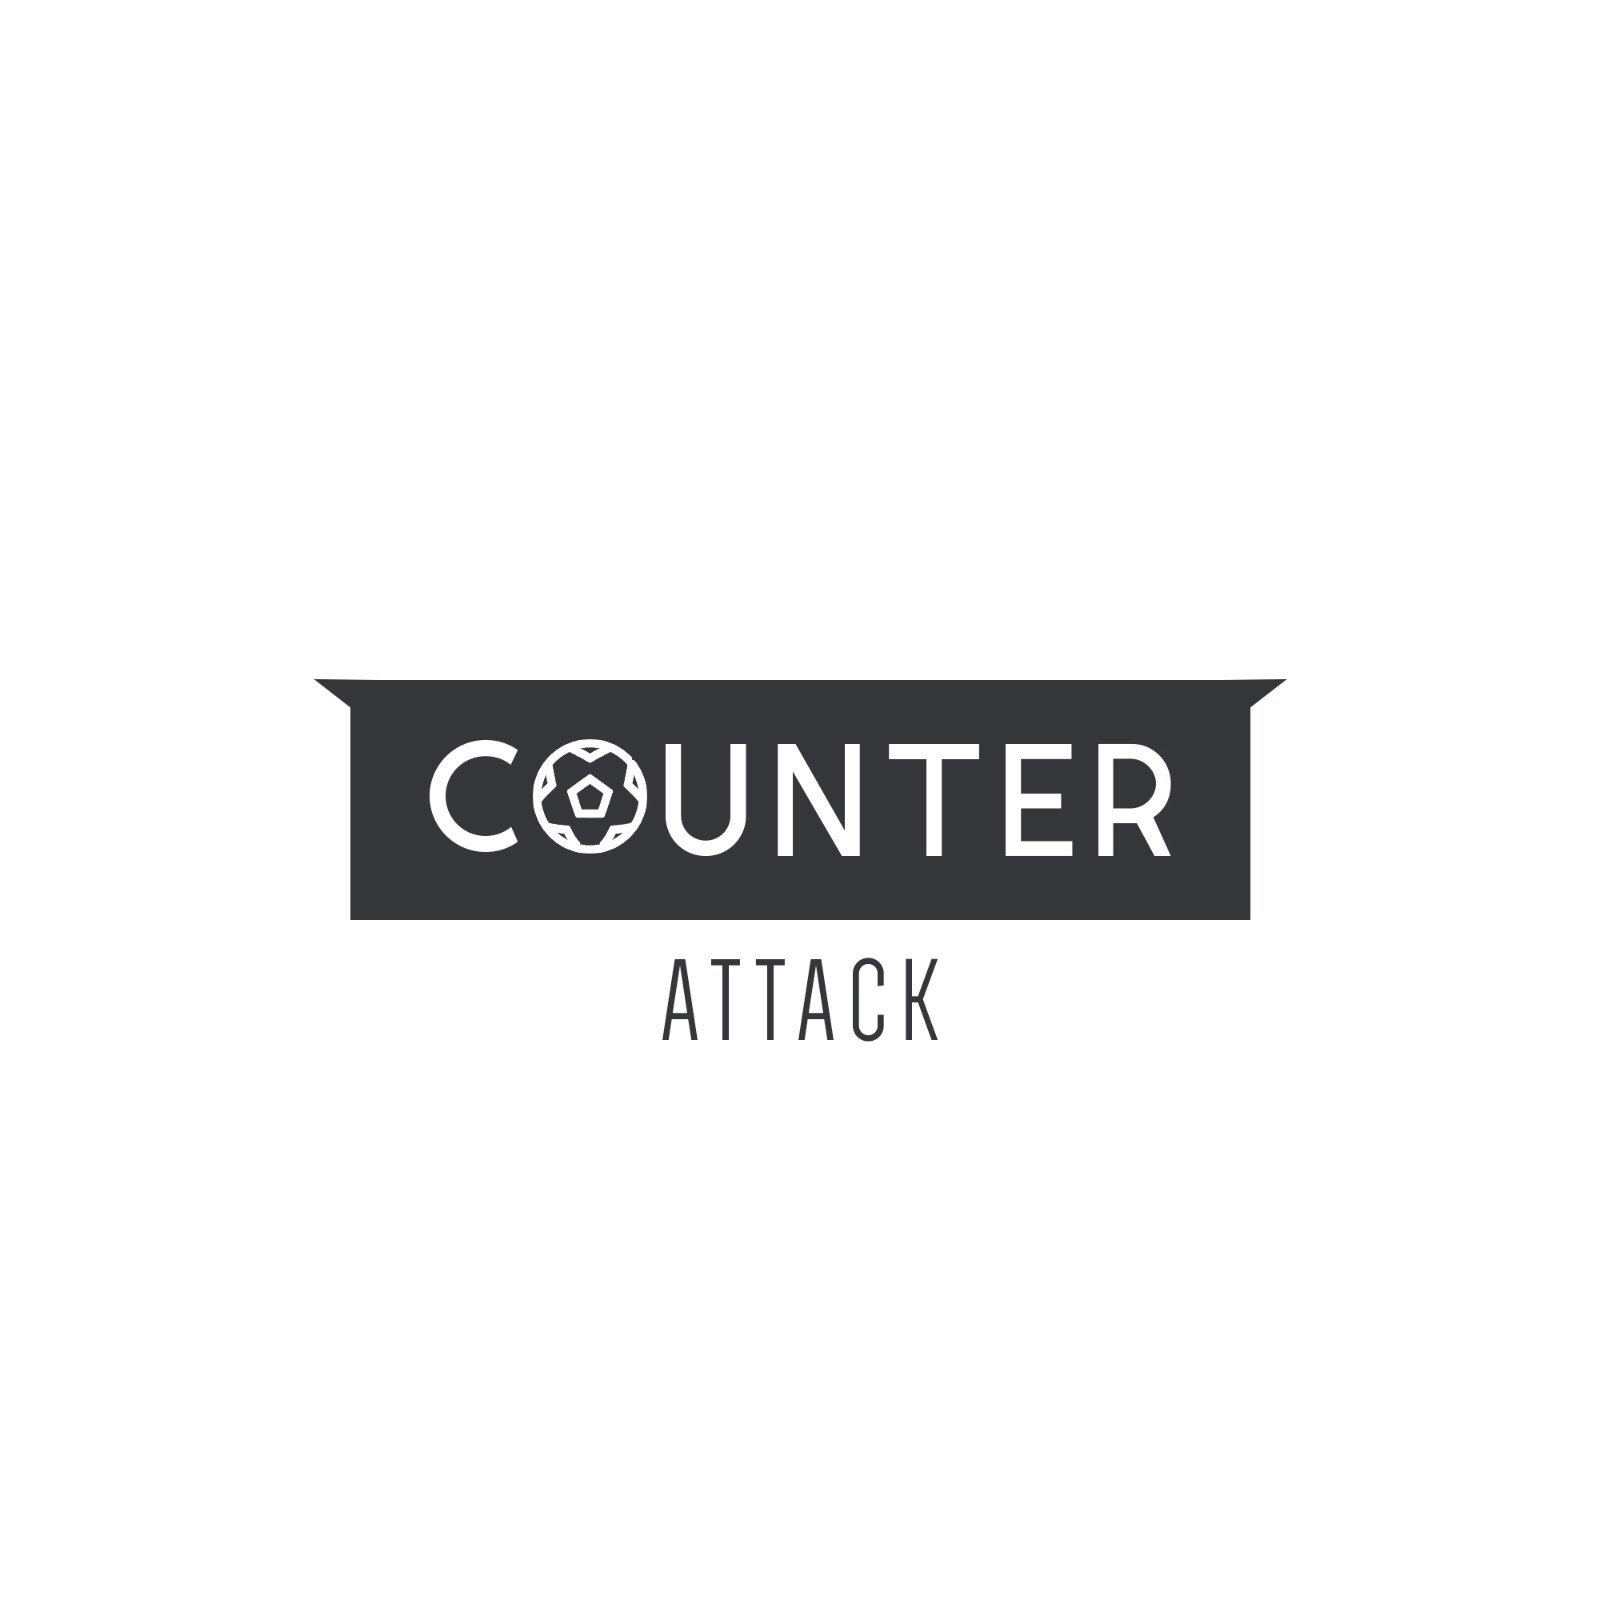 Counter Attack - Episode 159 - Lady Luck With Ancelotti